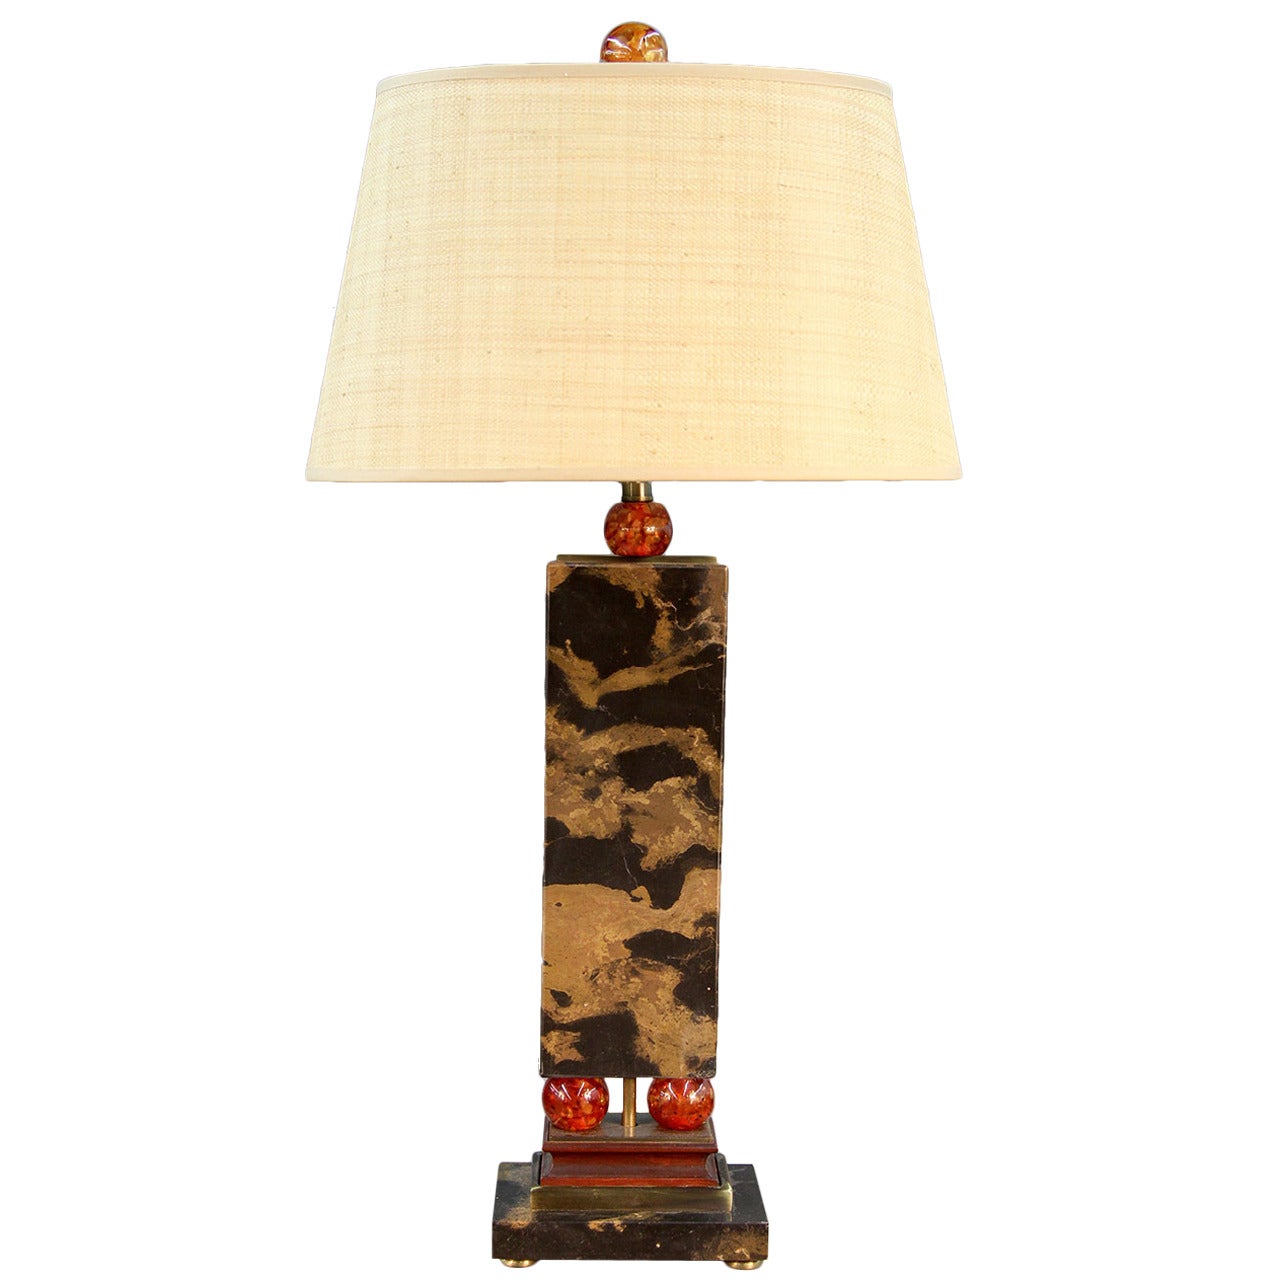 Unique Art Deco Black/Brown Marble Table Lamp with Orange Acrylic Accents For Sale